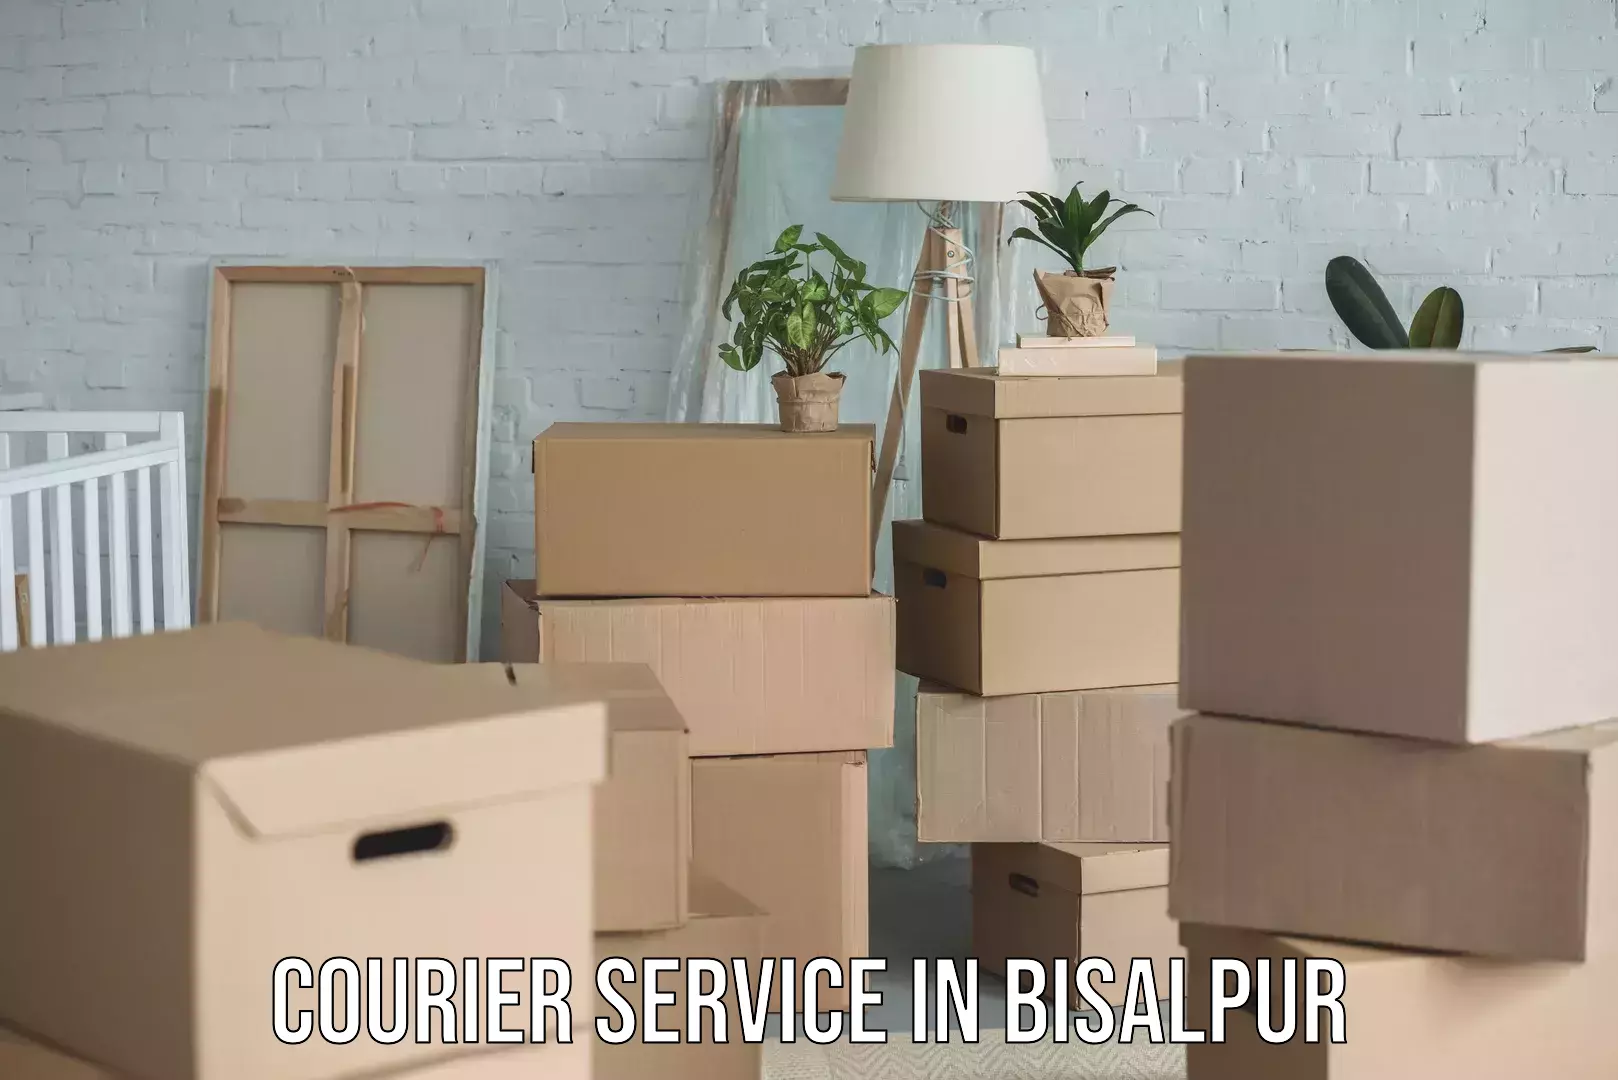 Online package tracking in Bisalpur